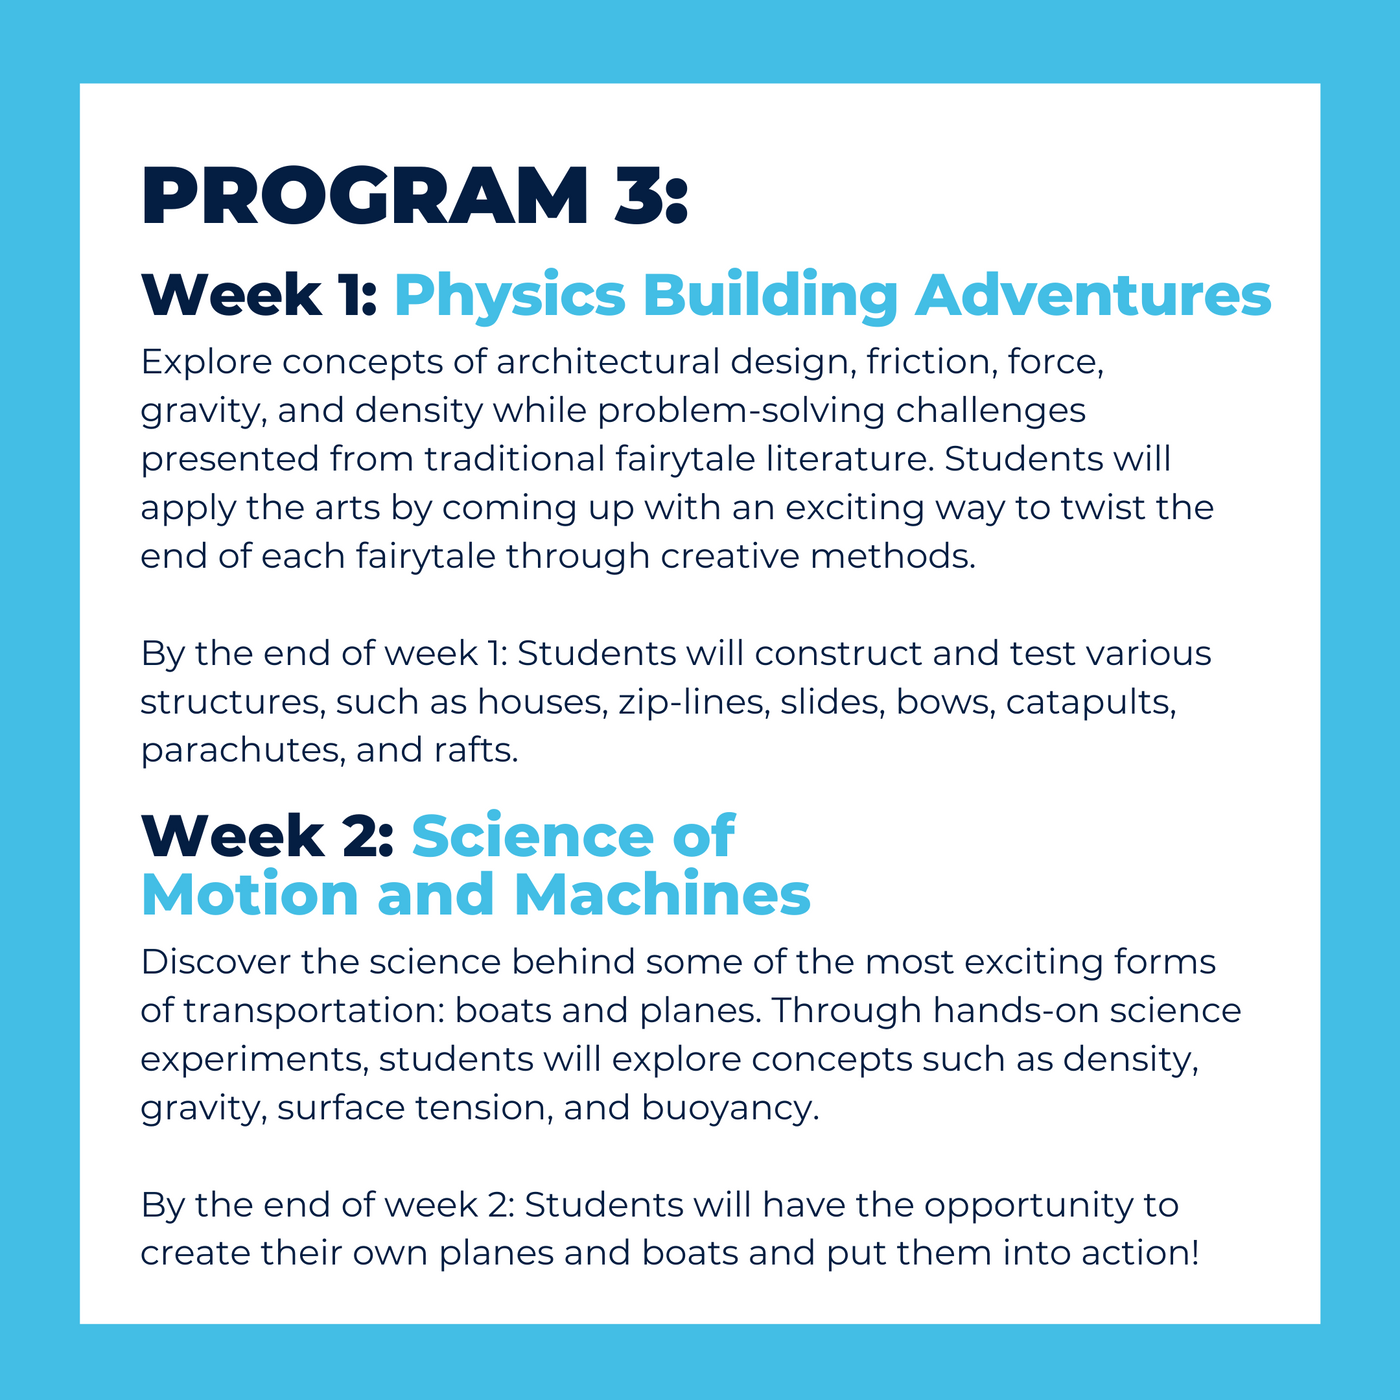 Science & Engineering Summer Camps